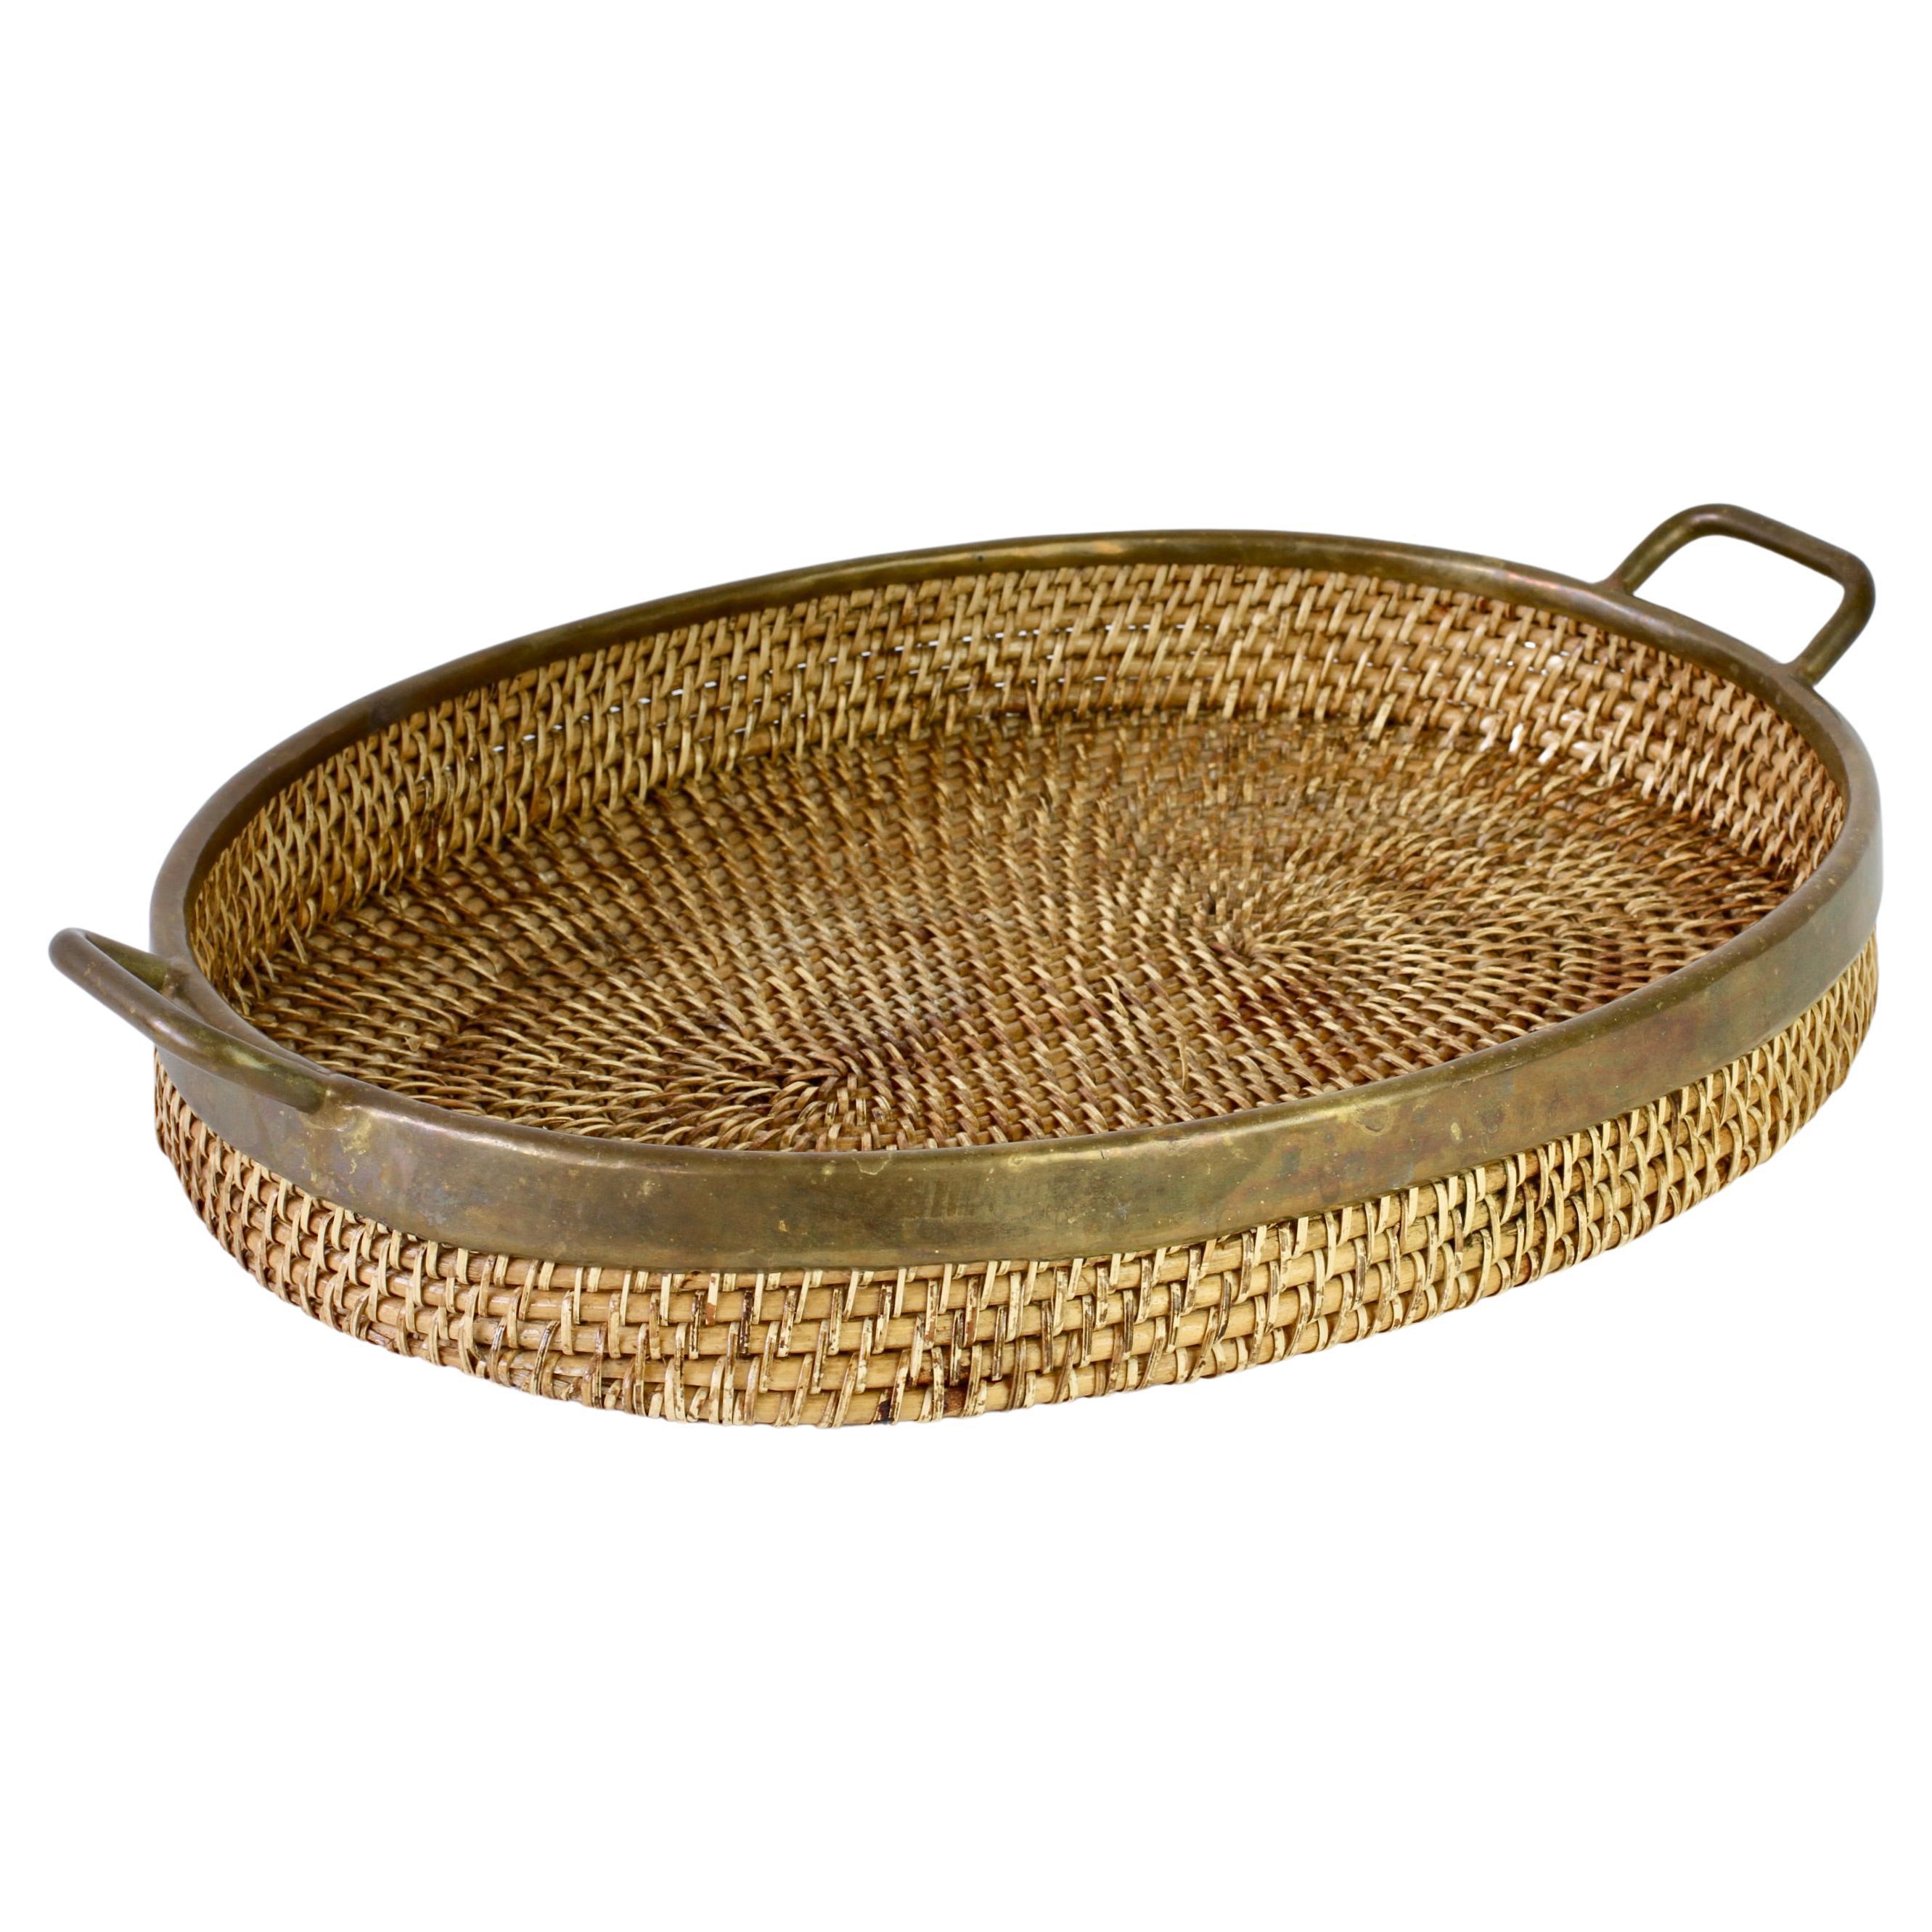 1970s Vintage Mid-Century Italian Brass Bamboo and Rattan Serving Tray / Platter